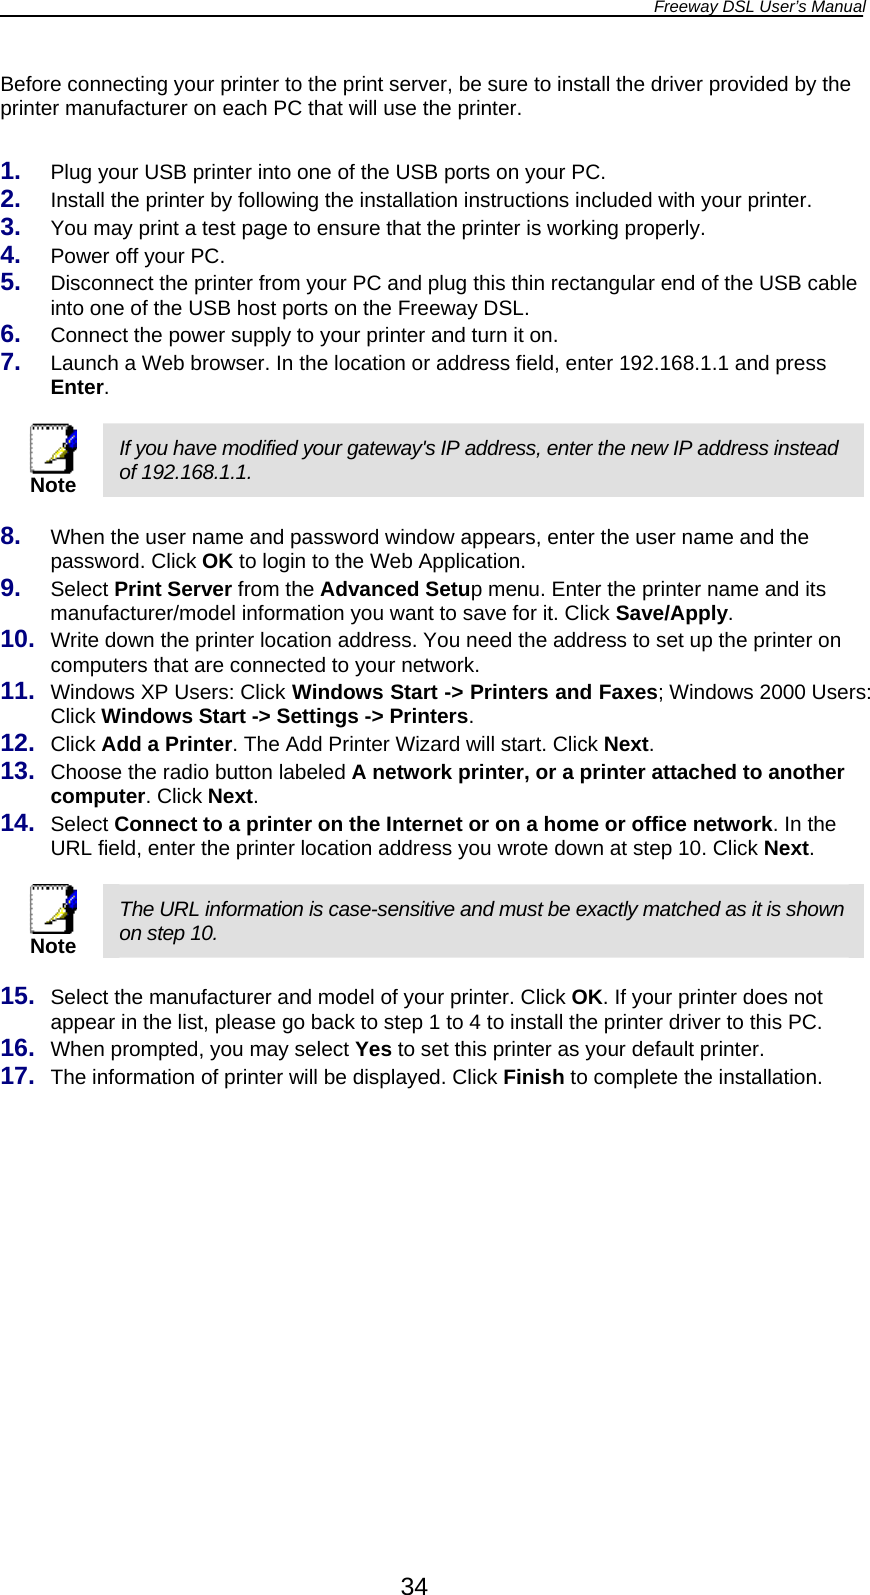 Freeway DSL User’s Manual  34 Before connecting your printer to the print server, be sure to install the driver provided by the printer manufacturer on each PC that will use the printer.  1.  Plug your USB printer into one of the USB ports on your PC. 2.  Install the printer by following the installation instructions included with your printer. 3.  You may print a test page to ensure that the printer is working properly. 4.  Power off your PC. 5.  Disconnect the printer from your PC and plug this thin rectangular end of the USB cable into one of the USB host ports on the Freeway DSL. 6.  Connect the power supply to your printer and turn it on.  7.  Launch a Web browser. In the location or address field, enter 192.168.1.1 and press Enter.   Note If you have modified your gateway&apos;s IP address, enter the new IP address instead of 192.168.1.1.  8.  When the user name and password window appears, enter the user name and the password. Click OK to login to the Web Application. 9.  Select Print Server from the Advanced Setup menu. Enter the printer name and its manufacturer/model information you want to save for it. Click Save/Apply. 10.  Write down the printer location address. You need the address to set up the printer on computers that are connected to your network. 11.  Windows XP Users: Click Windows Start -&gt; Printers and Faxes; Windows 2000 Users: Click Windows Start -&gt; Settings -&gt; Printers. 12.  Click Add a Printer. The Add Printer Wizard will start. Click Next. 13.  Choose the radio button labeled A network printer, or a printer attached to another computer. Click Next. 14.  Select Connect to a printer on the Internet or on a home or office network. In the URL field, enter the printer location address you wrote down at step 10. Click Next.   Note The URL information is case-sensitive and must be exactly matched as it is shown on step 10.  15.  Select the manufacturer and model of your printer. Click OK. If your printer does not appear in the list, please go back to step 1 to 4 to install the printer driver to this PC. 16.  When prompted, you may select Yes to set this printer as your default printer. 17.  The information of printer will be displayed. Click Finish to complete the installation.  